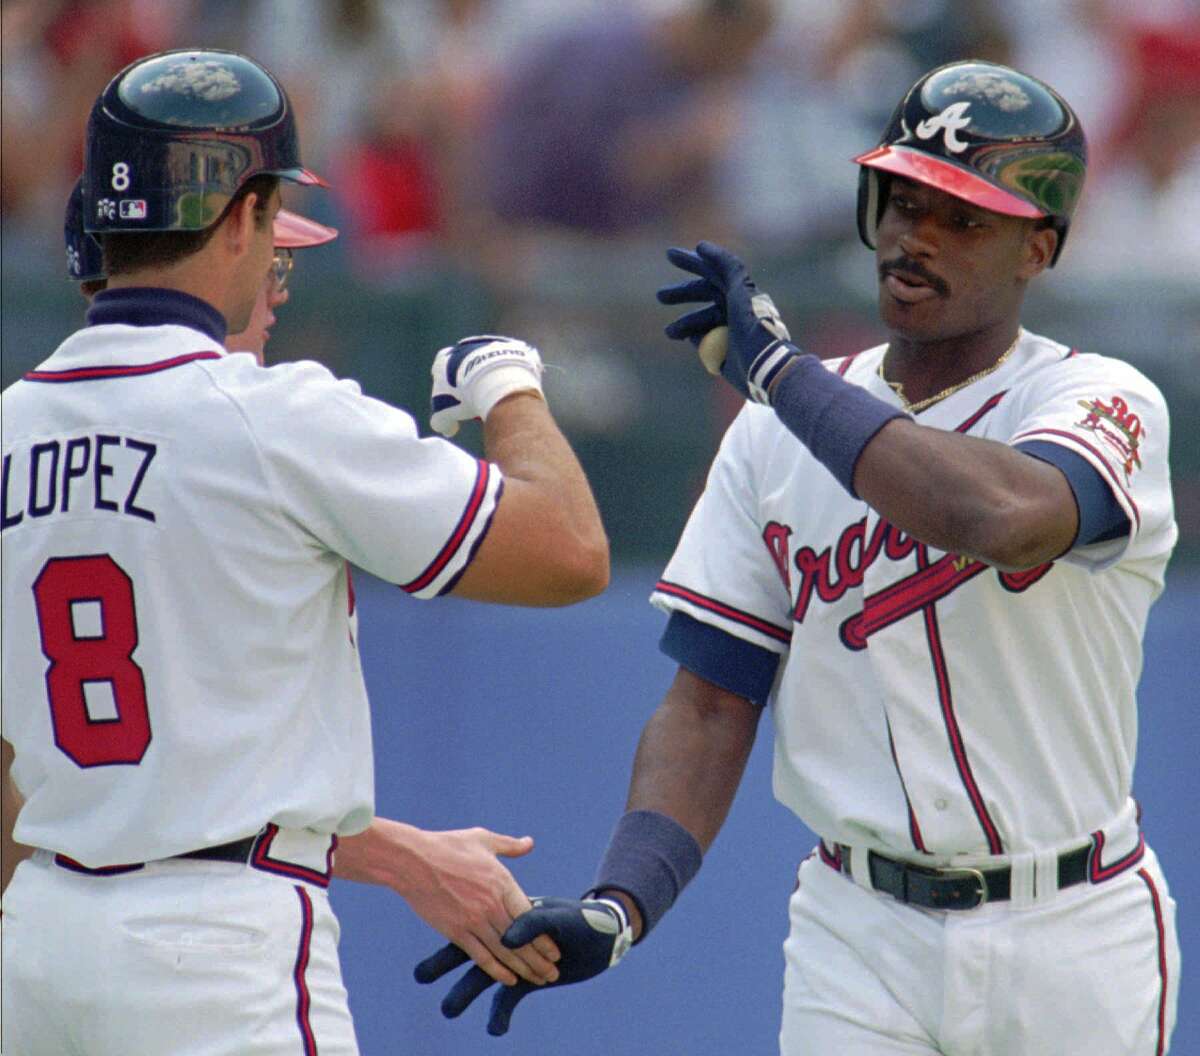 Atlanta Braves first baseman Fred McGriff, right, is congratulated by catcher Javier Lopez on his first homer of the season Wednesday, April 26, 1995 in Atlanta. The Braves defeated the San Francisco Giants 12-5 with McGriff getting two homers. (AP Photo/John Bazemore) ALSO Ran on: 07-29-2007 Fred McGriff went to the struggling Braves in a trade with the Padres in 1993 and helped his new team to a 104-win season. The 2007 Braves are looking hard at making a trade for the Rangers' Mark Teixeira. Ran on: 07-29-2007